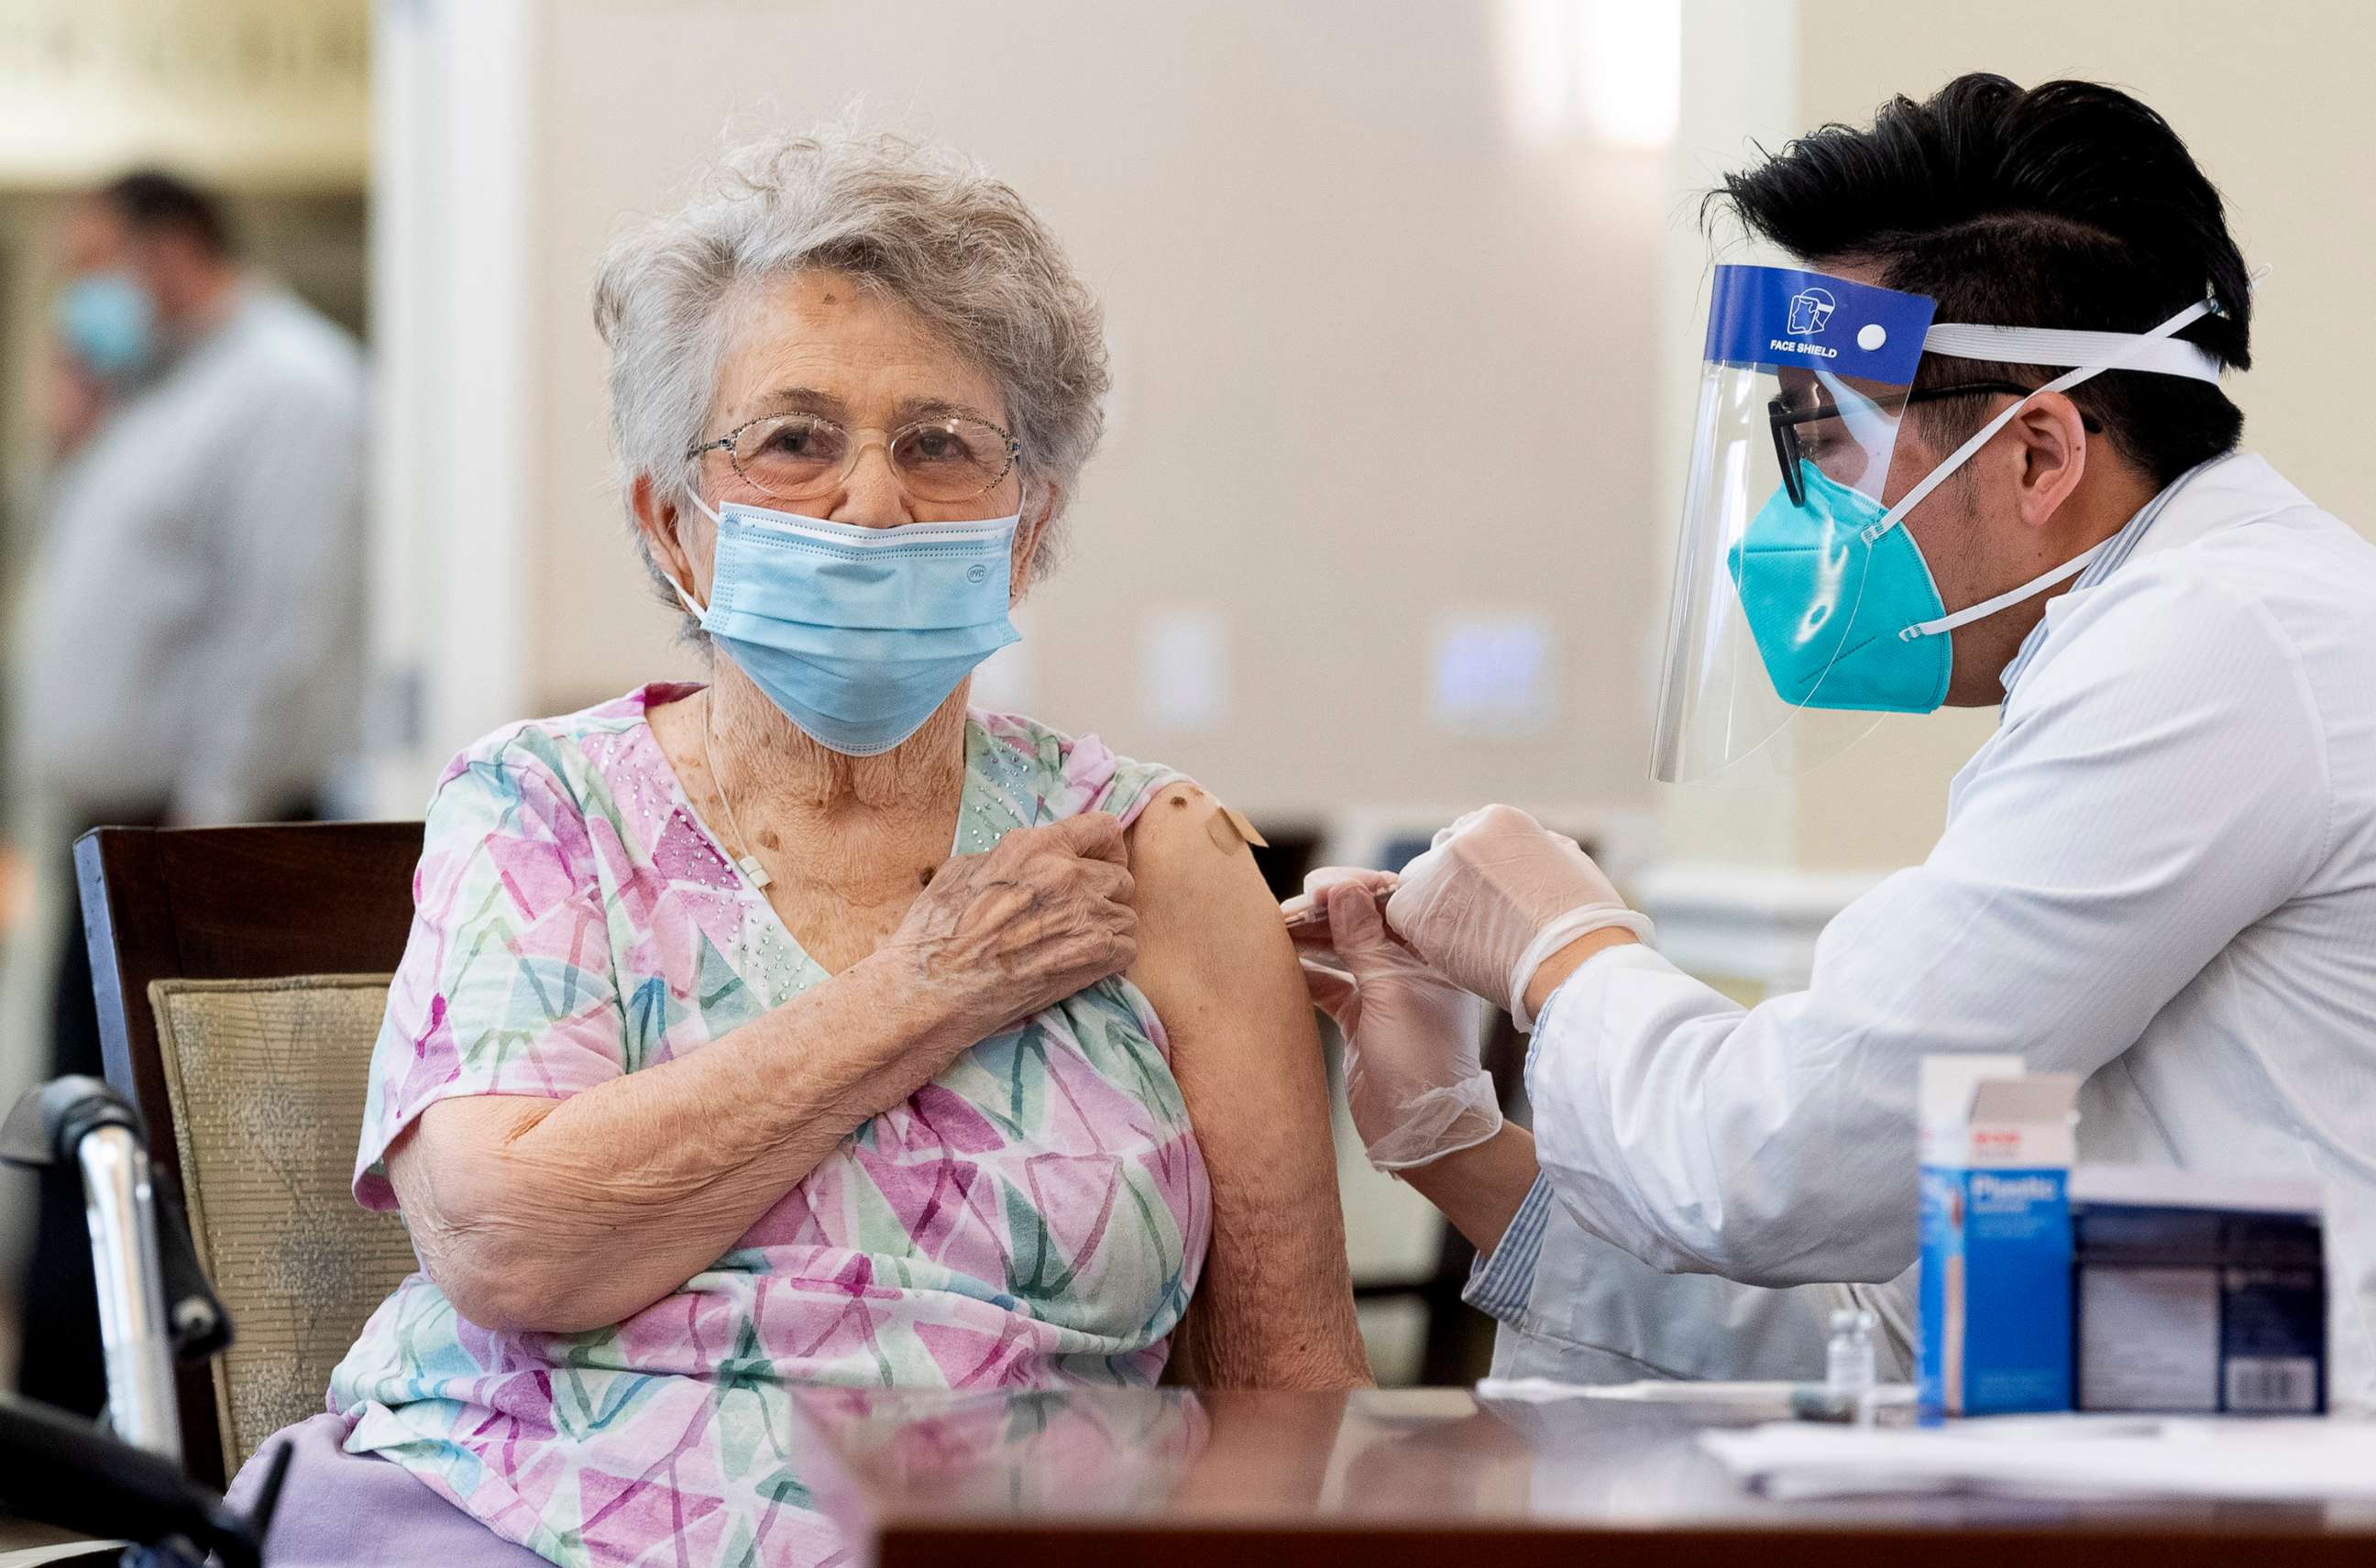 PHOTO: A CVS pharmacist gives the Pfizer/BioNTech COVID-19 vaccine to a resident at the Emerald Court senior living community in Anaheim, Calif., Jan. 8, 2021.